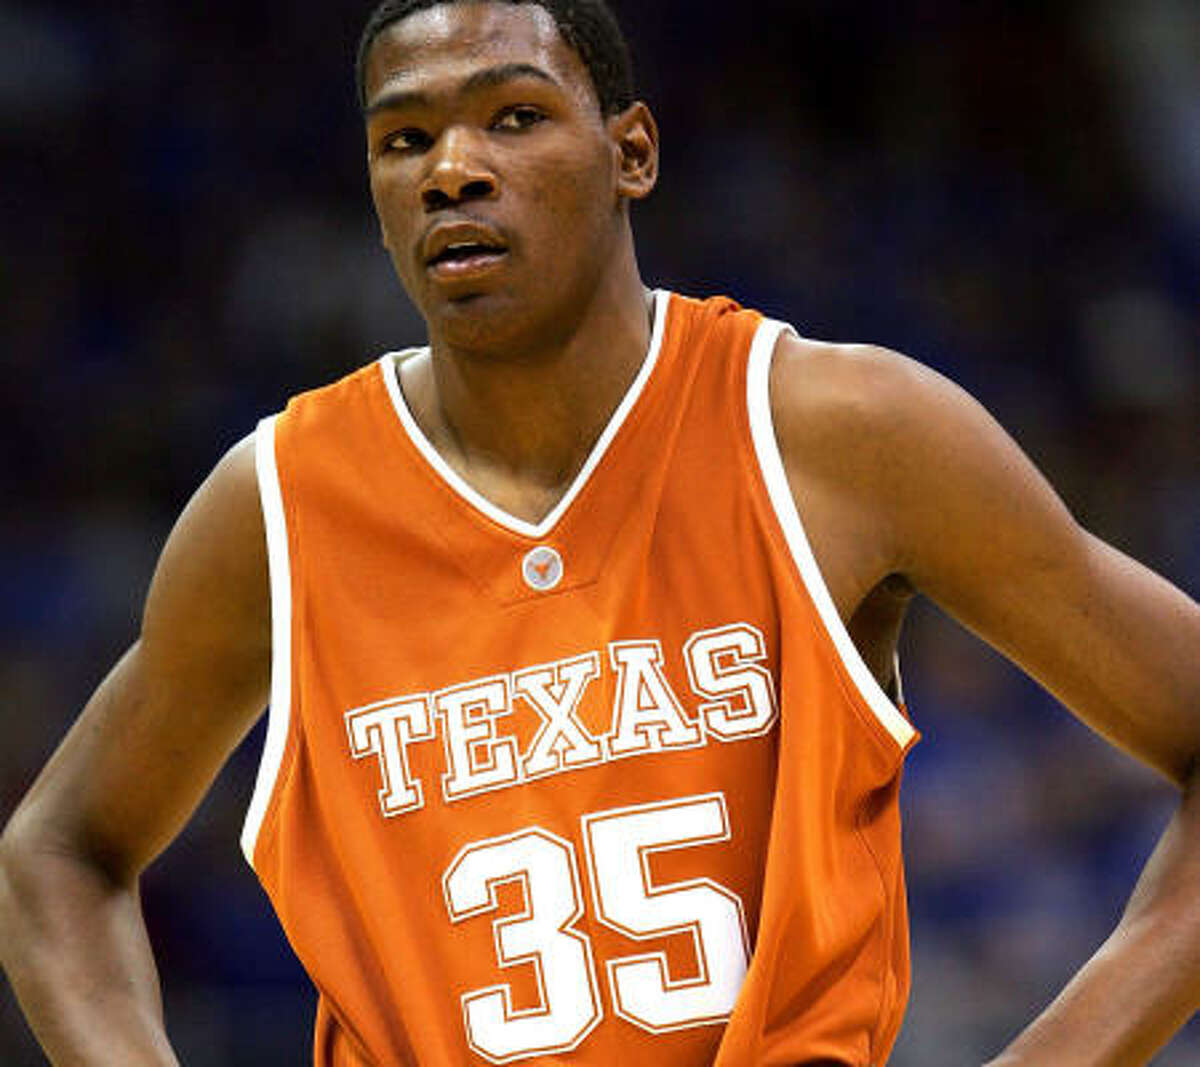 kevin durant ut jersey